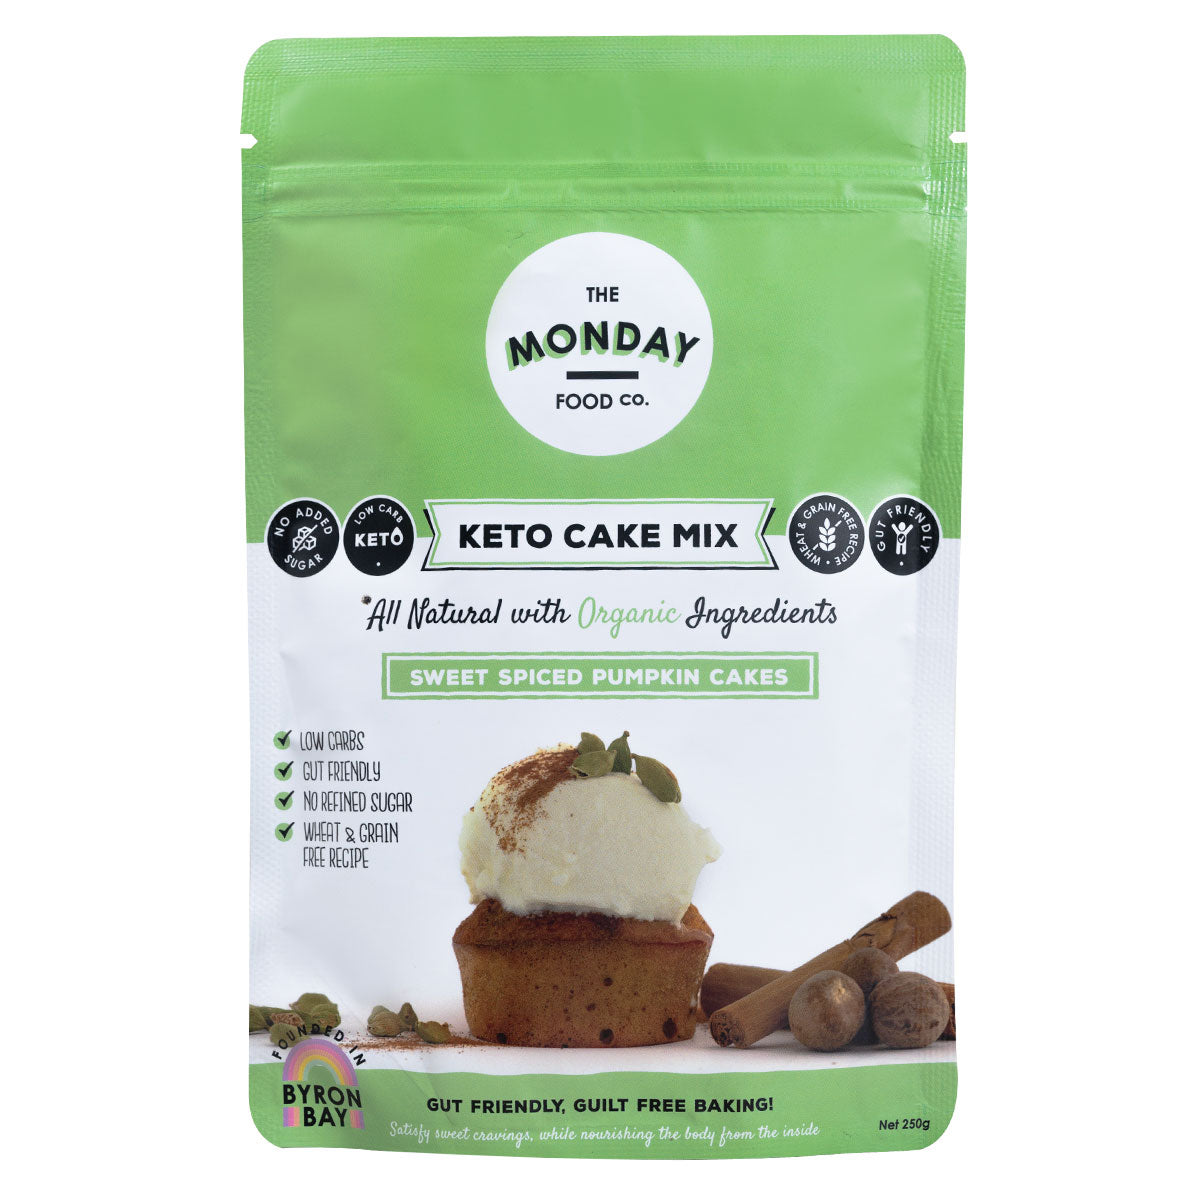 THE MONDAY FOOD CO Keto Cake Mix Sweet Spiced Pumpkin Cakes 250g